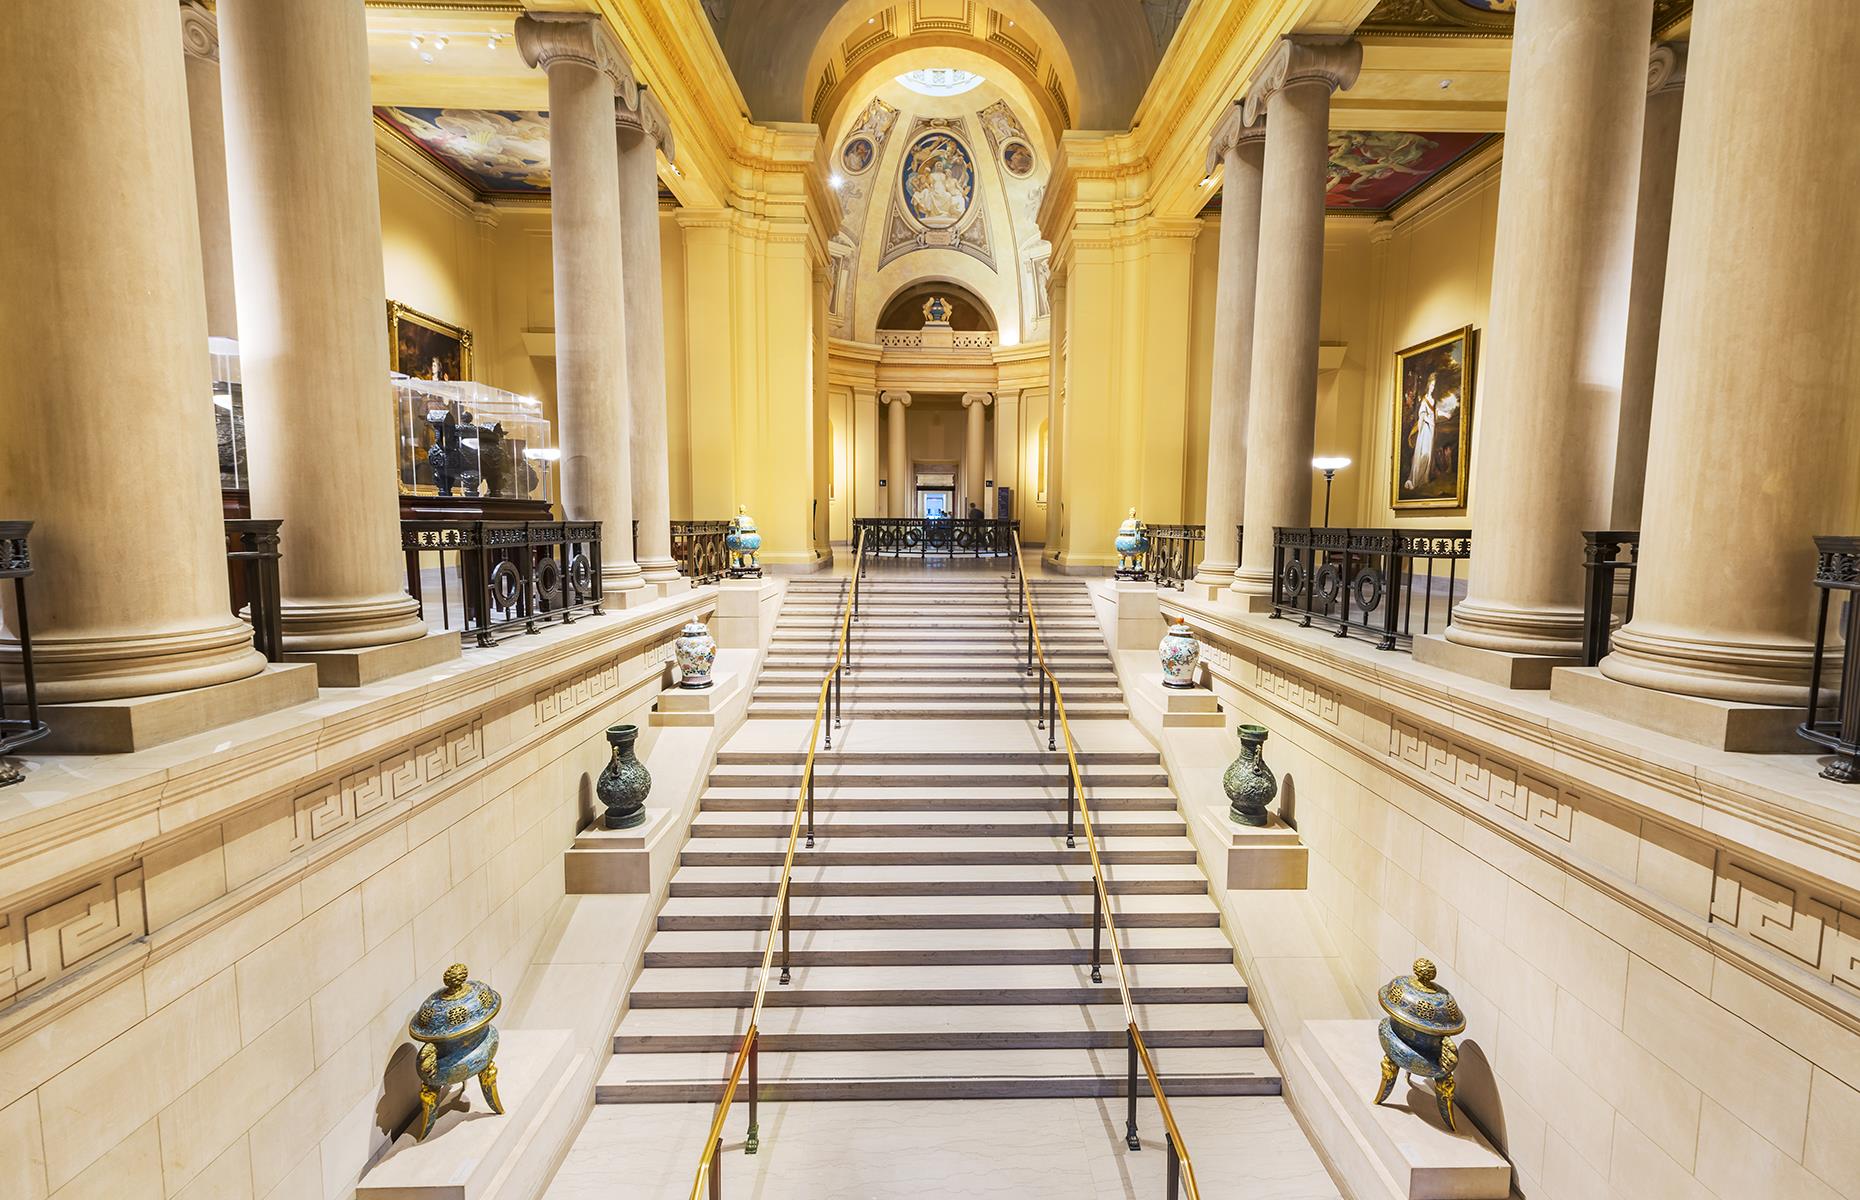 <p>With more than 450,000 works in its collection, the Museum of Fine Arts in Boston is one of America's most comprehensive art museums. Thanks to Google Arts & Culture, it's now possible to tour this incredible museum from your living room. You can start by diving deep into the museum's <a href="https://artsandculture.google.com/partner/museum-of-fine-arts-boston?hl=en">digitalized collection before virtually heading inside the museum itself</a>. </p>